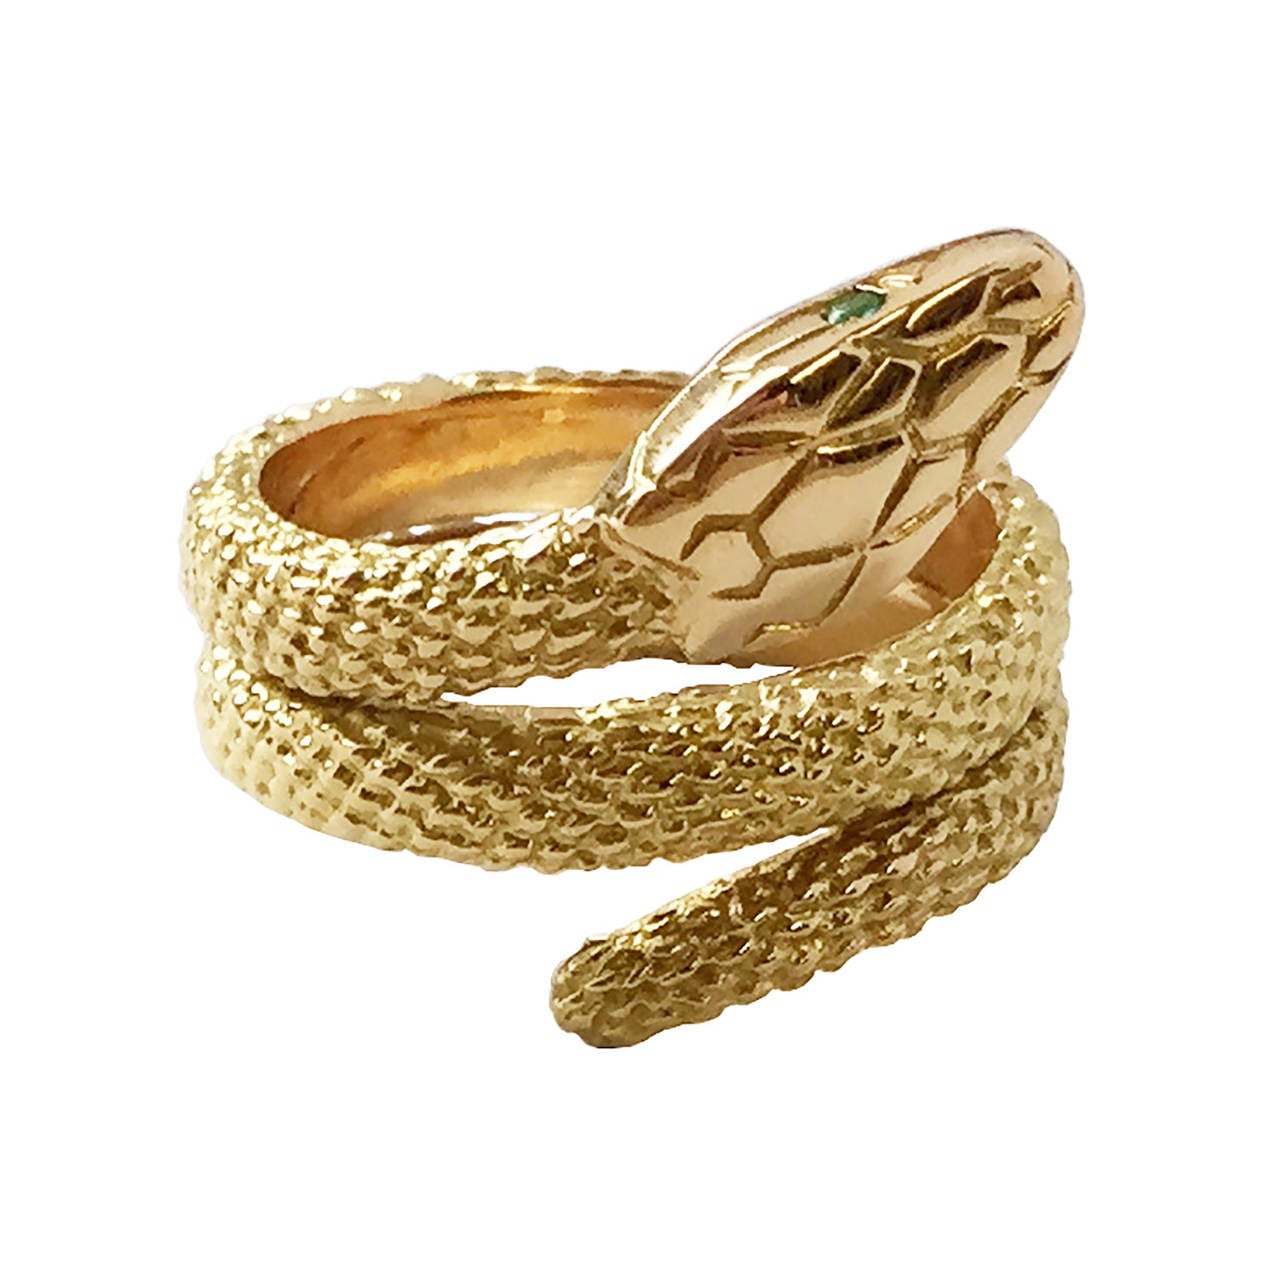 This golden, emerald-eyed serpent by Cartier coils thrice around your finger. Crafted in 18 karat yellow gold. Stamped CARTIER, 124065, 750 for K18. This ring cannot be sized.